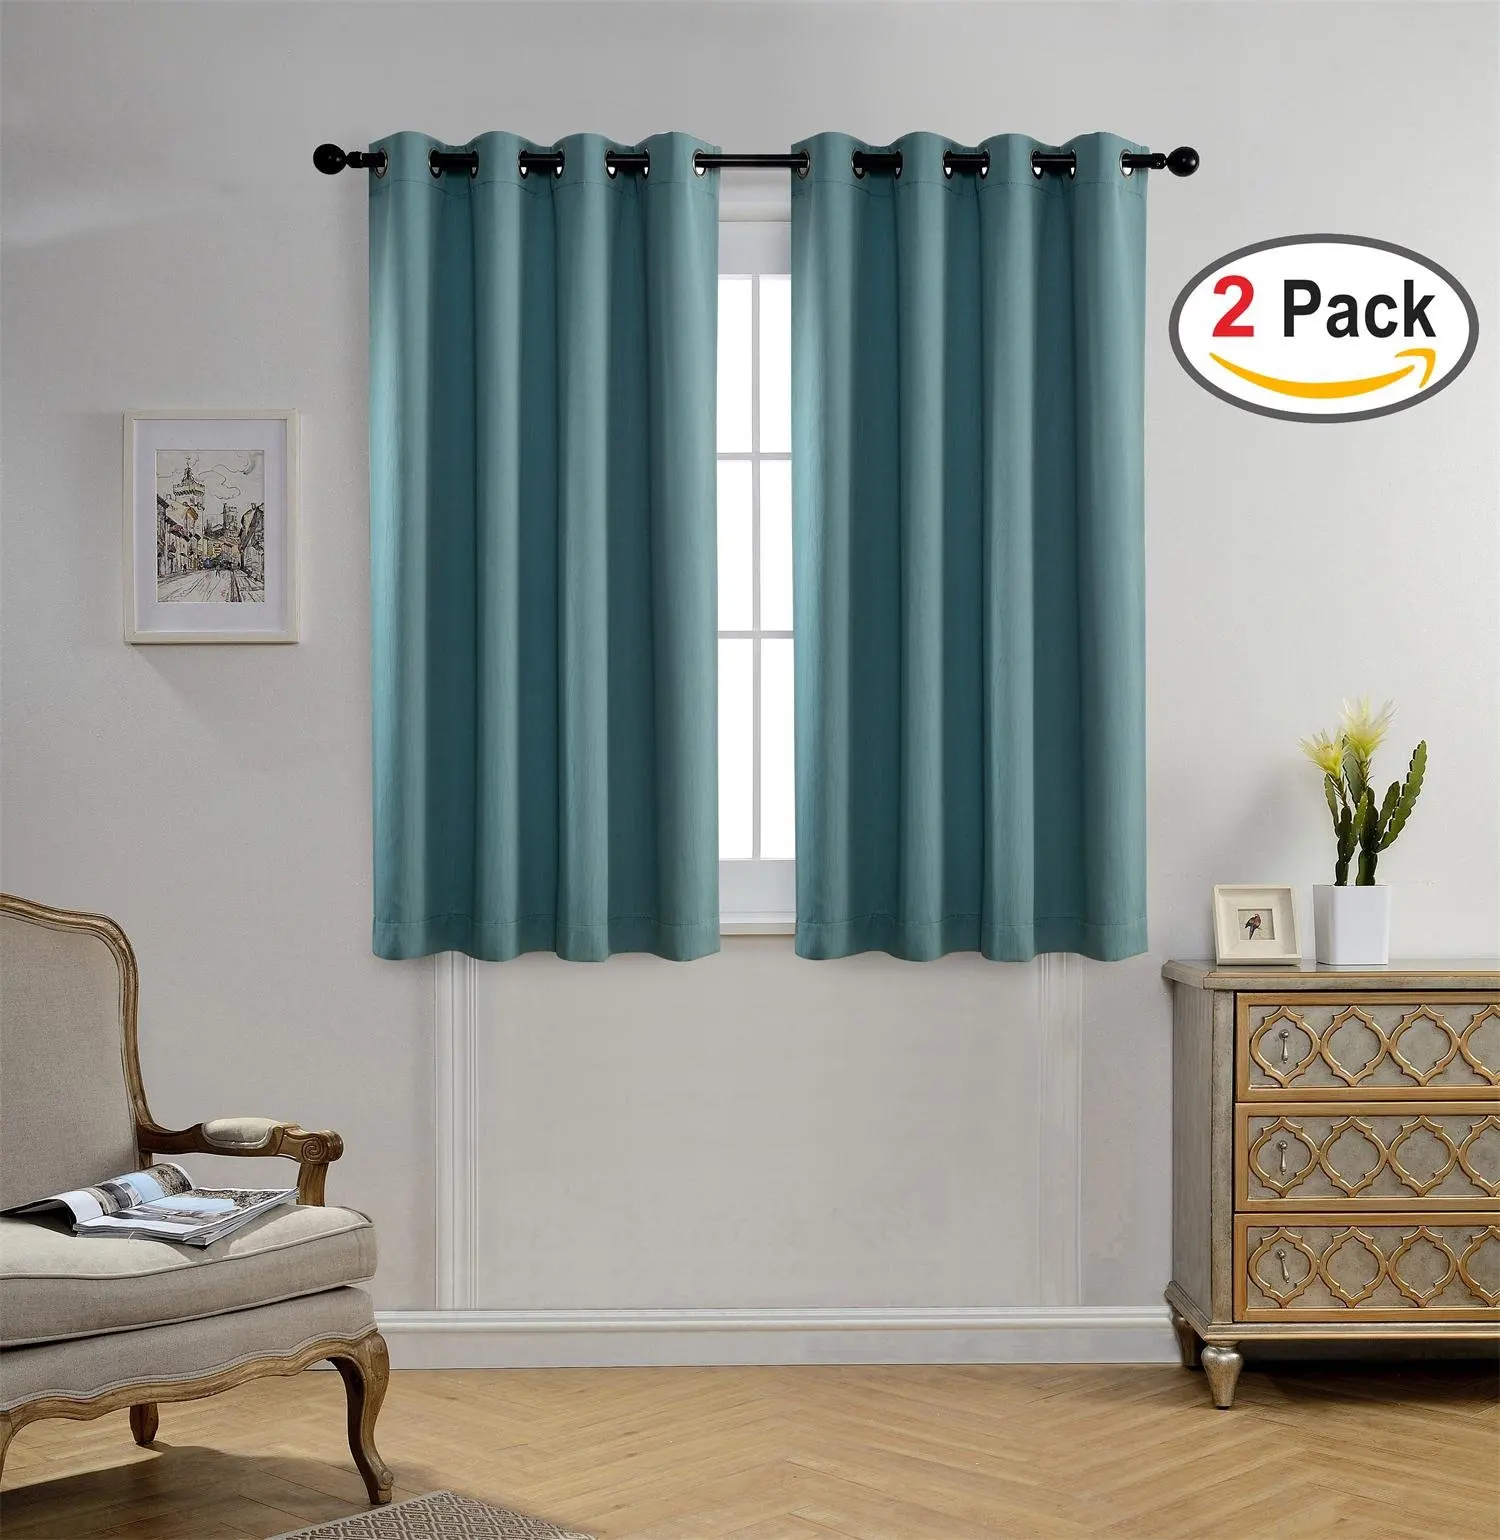 Cheap Teal Grommet Curtains, find Teal Grommet Curtains deals on line